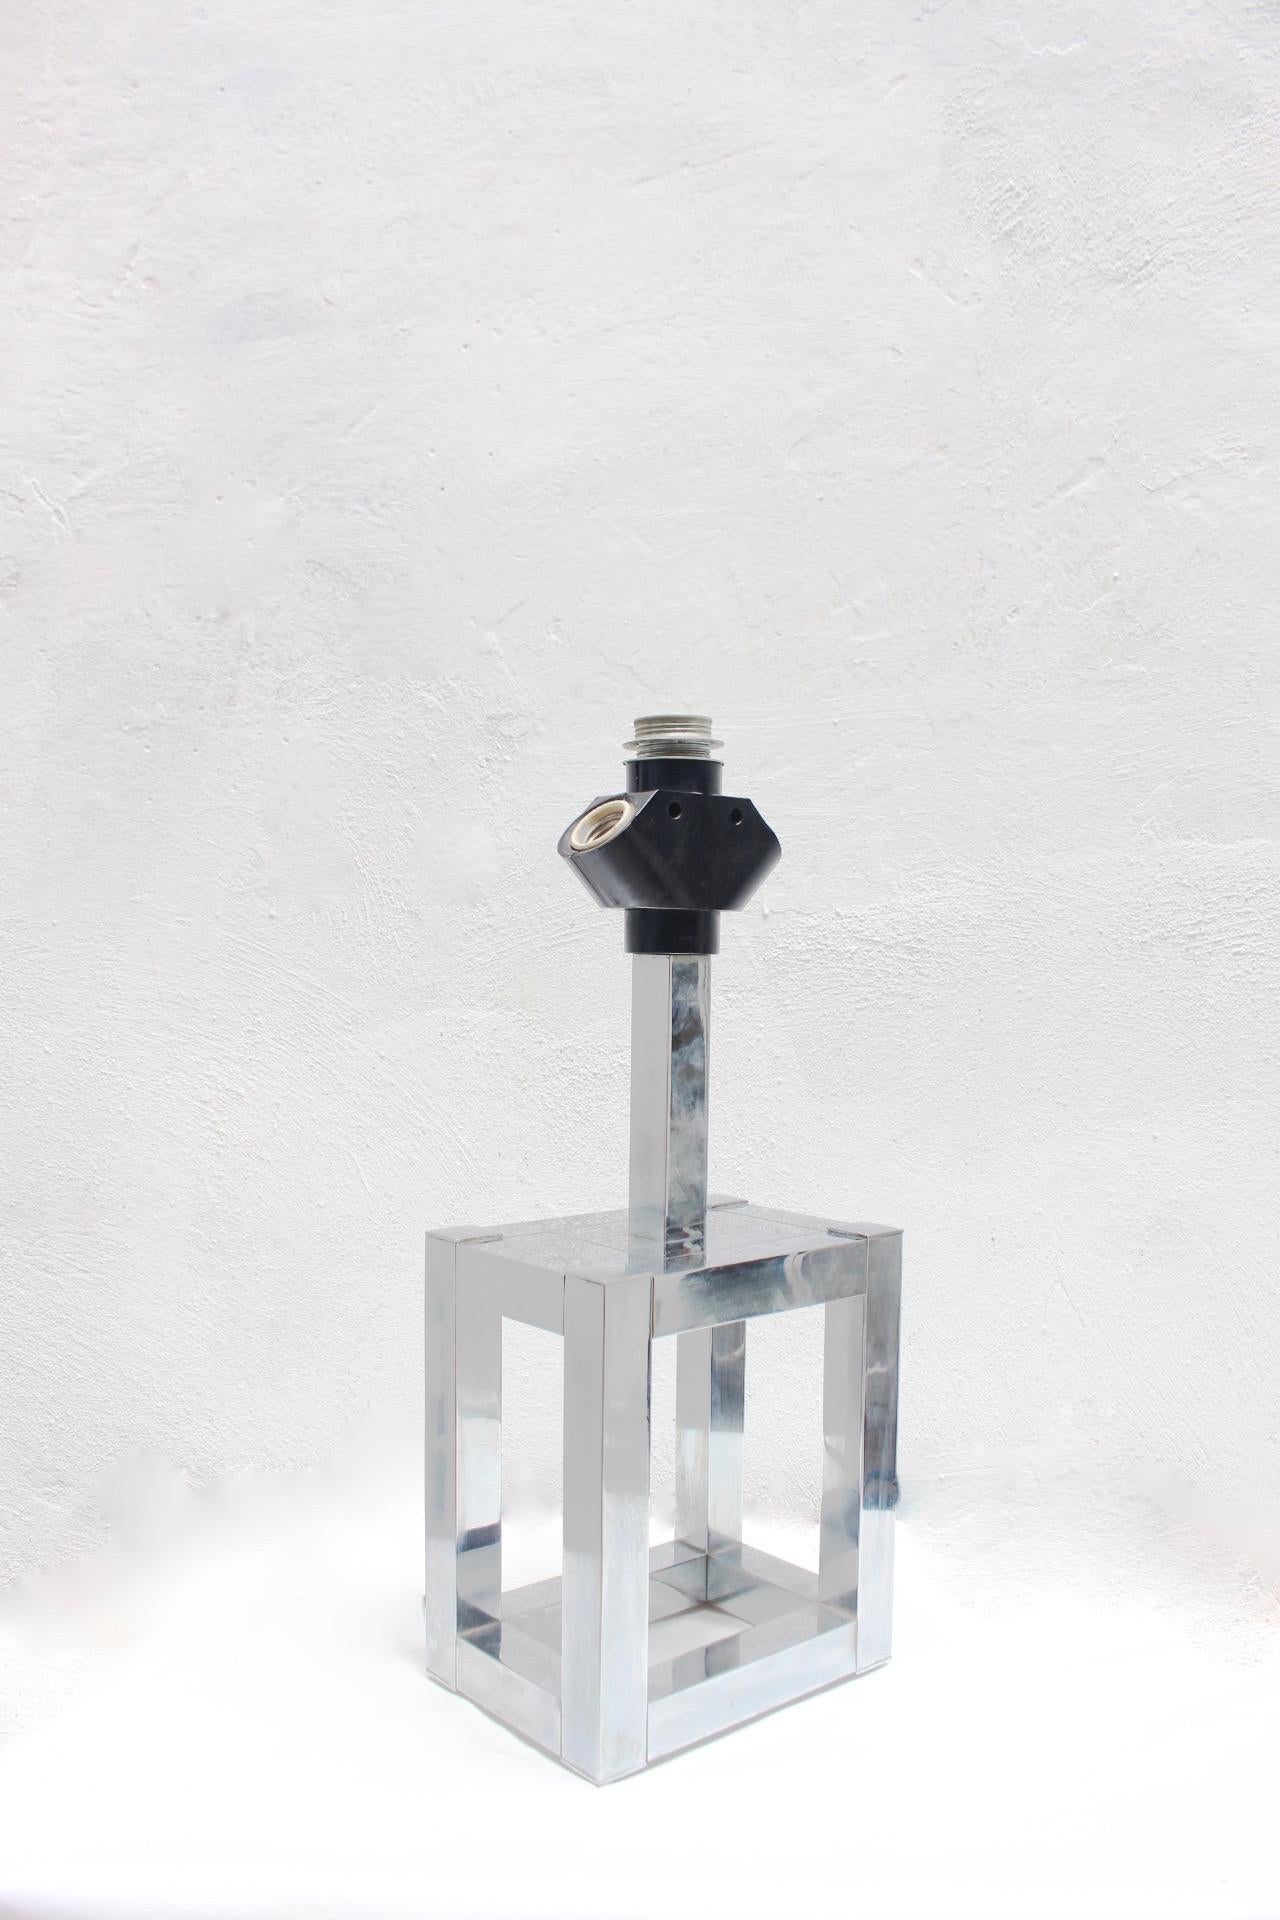 Midcentury Willy Rizzo Sculptural Cubic Sculptural Table Lamp for Lumica, 1970s For Sale 4